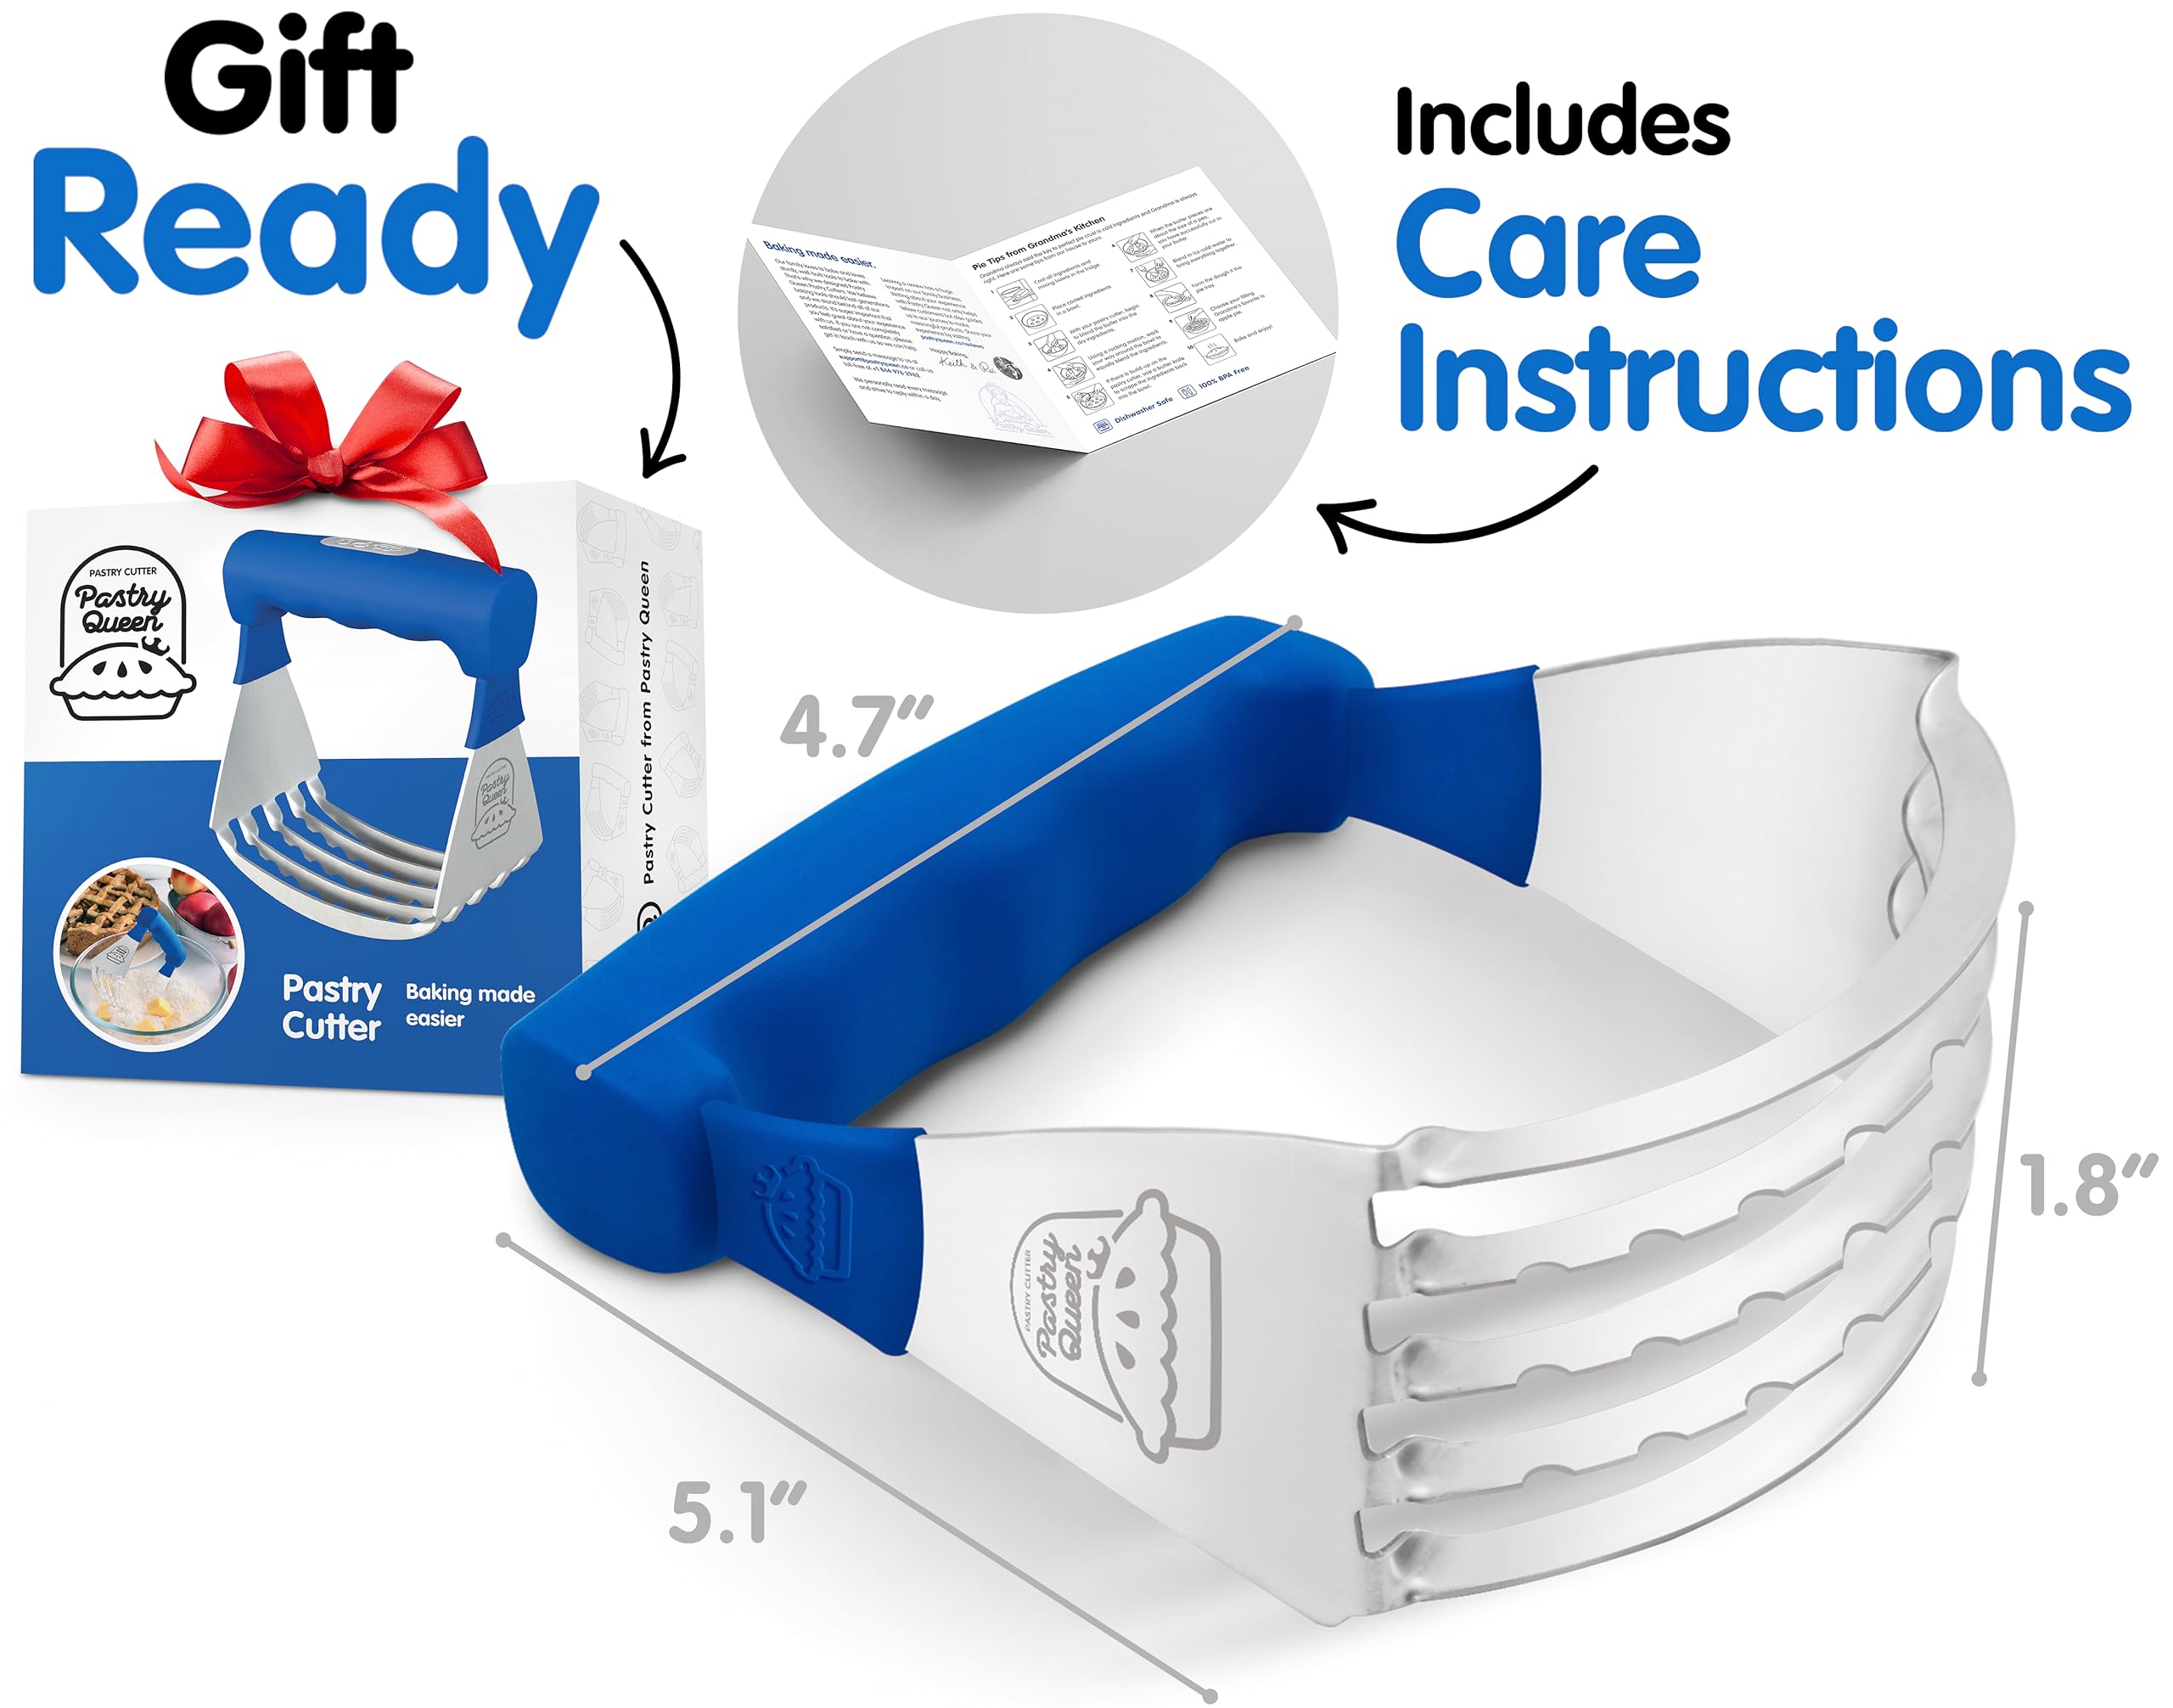 Pastry Cutter Tool - Heavy Duty Stainless Steel Pastry Dough Blender for Baking, Comfortable Handle, Dishwasher Safe, Create Perfectly Flaky Pie Crust, Biscuits & More - Blue